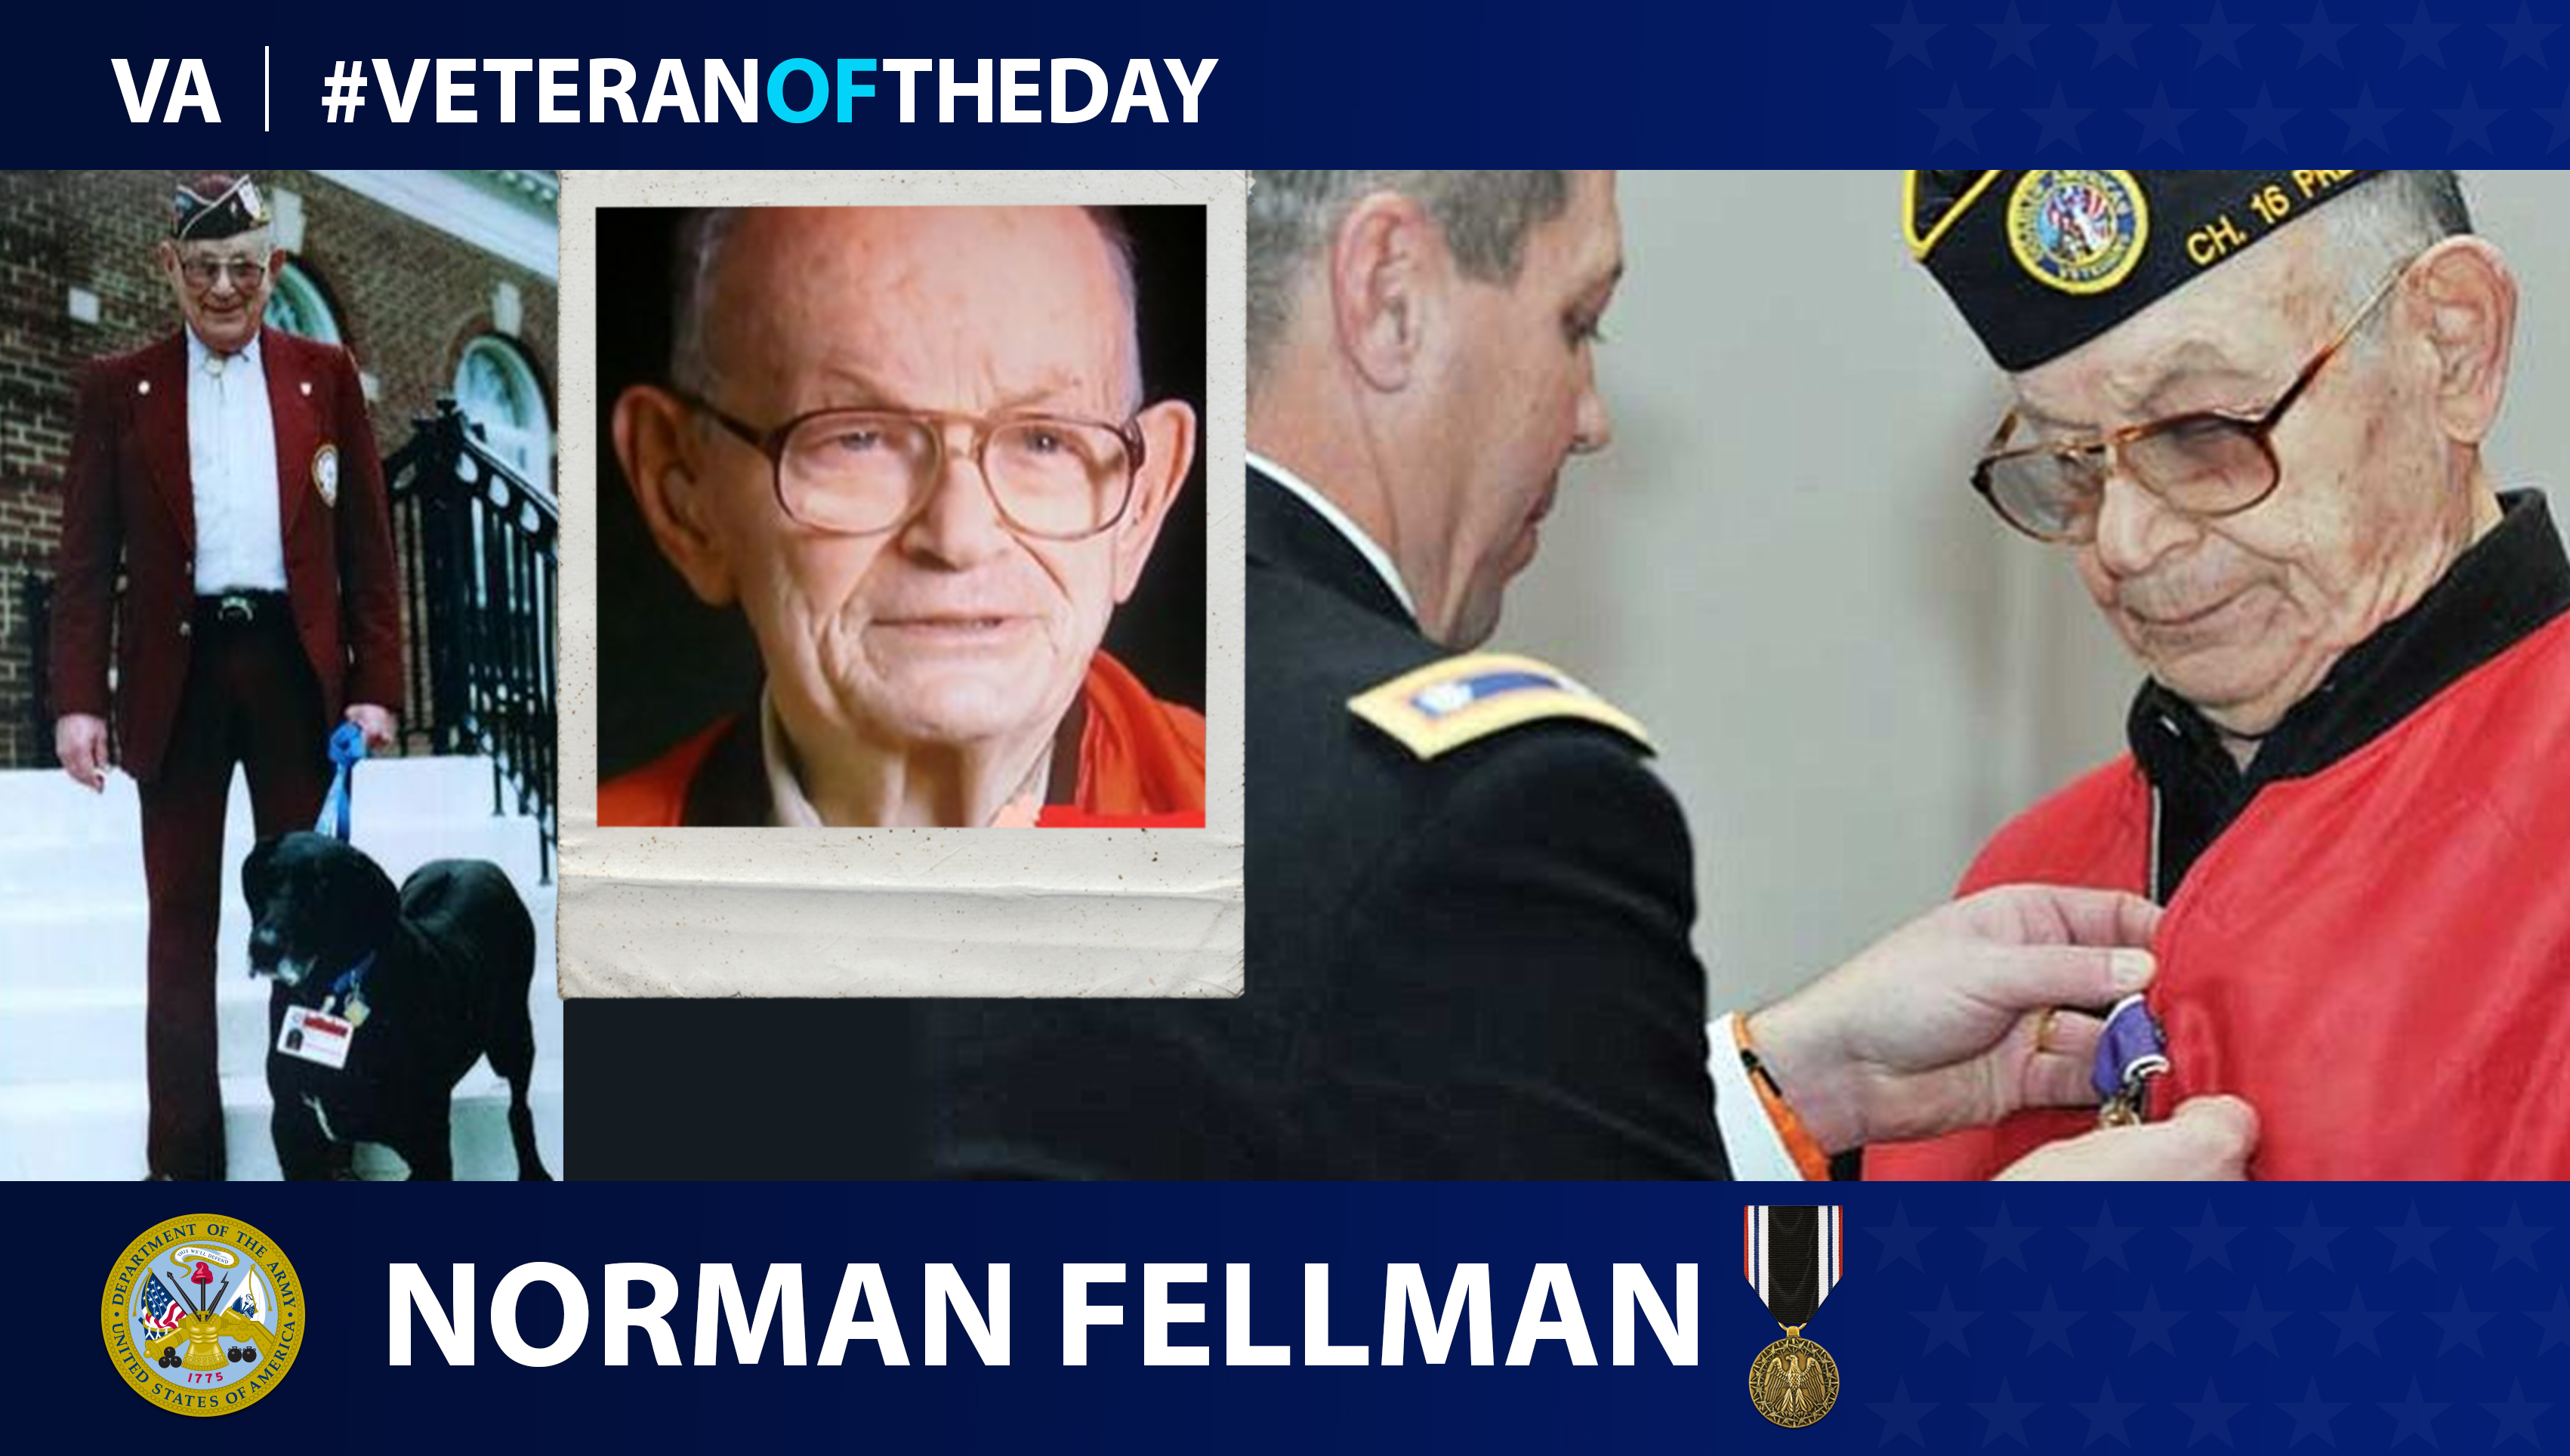 Army Veteran Norman Fellman is today's Veteran of the Day.